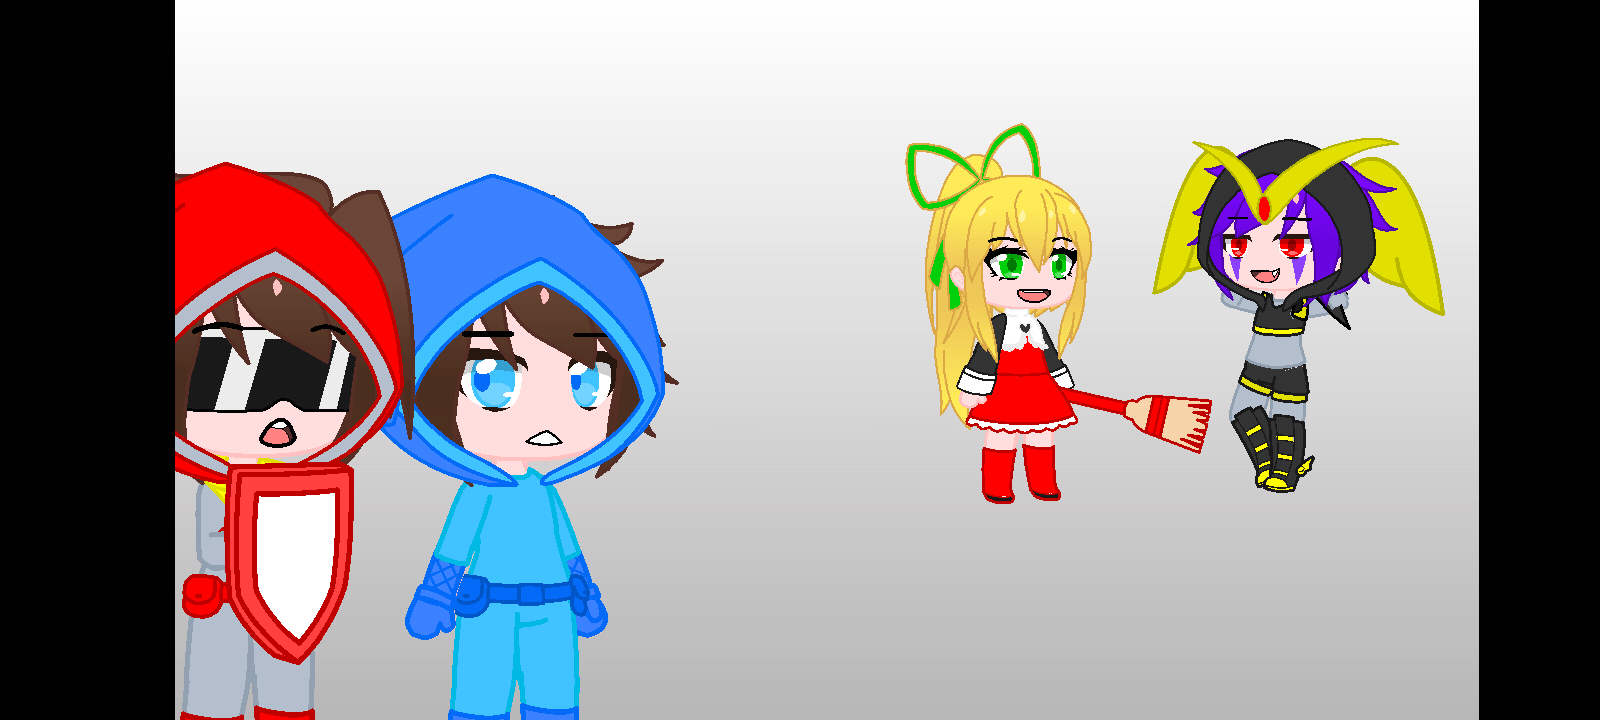 Remake of zack and val in Gacha Universal by shadow123creator on DeviantArt